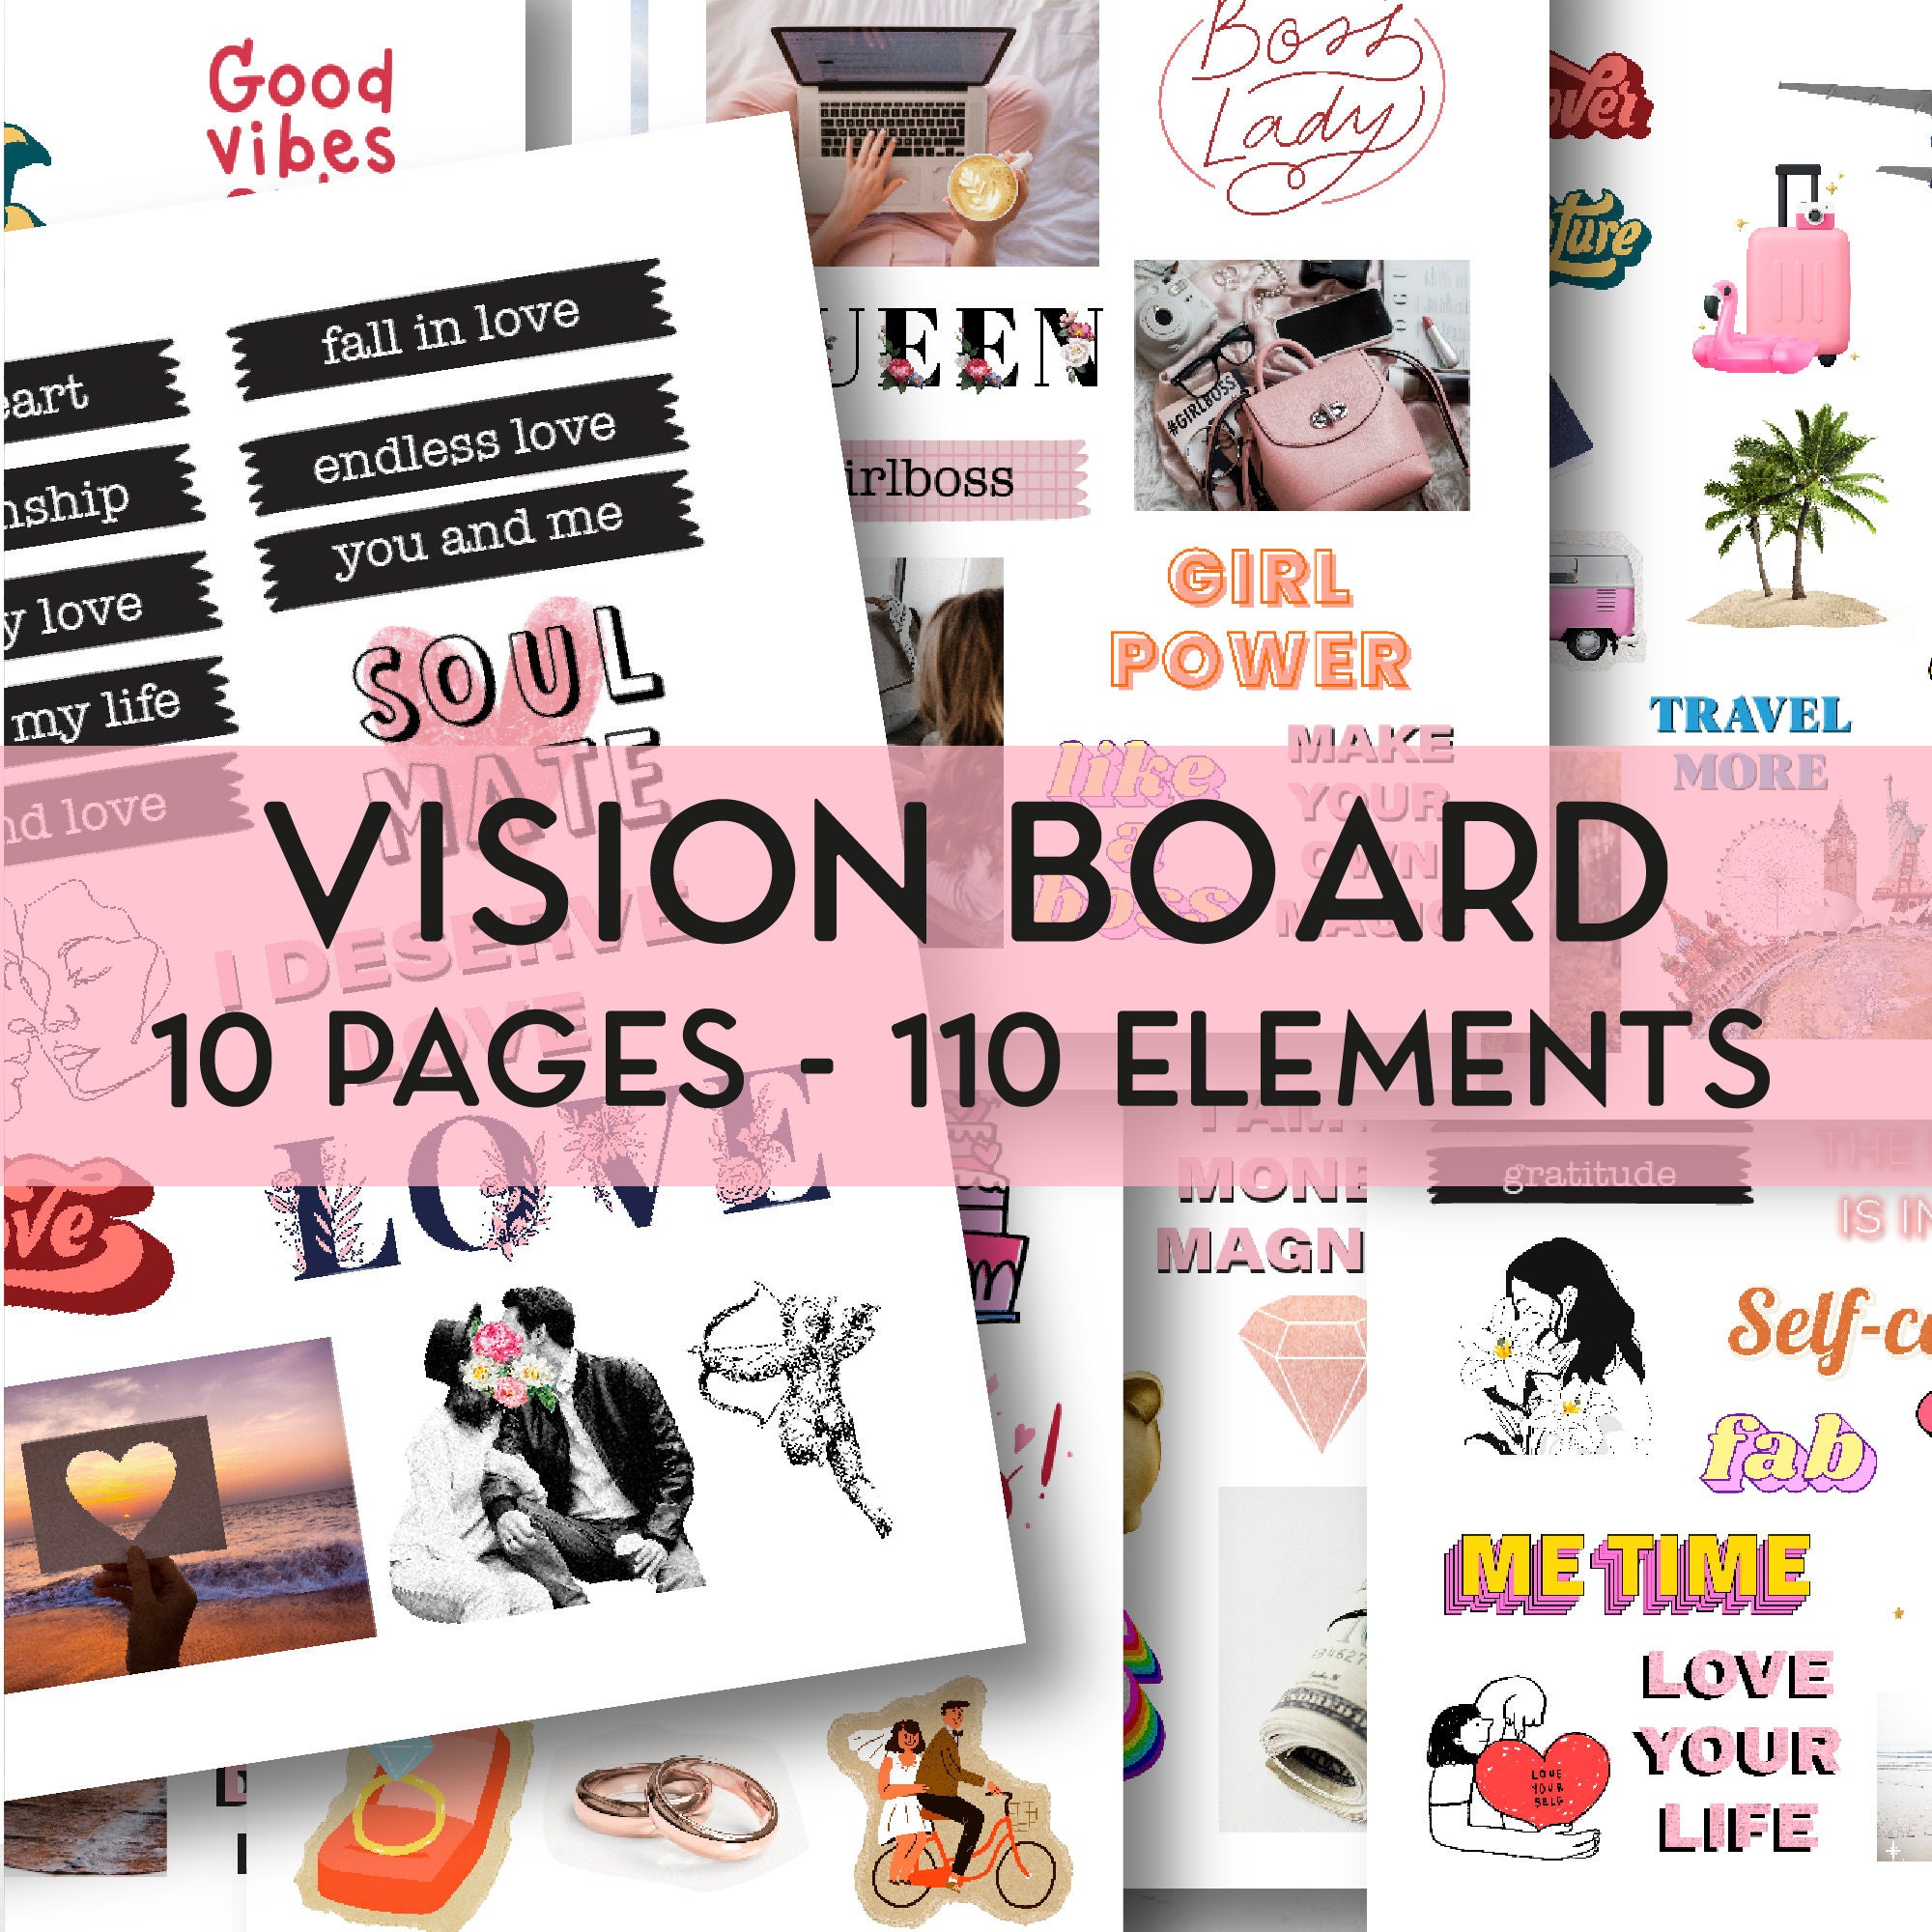 2024 Vision Board Kit With Printable Words, Quotes, Images, Frames